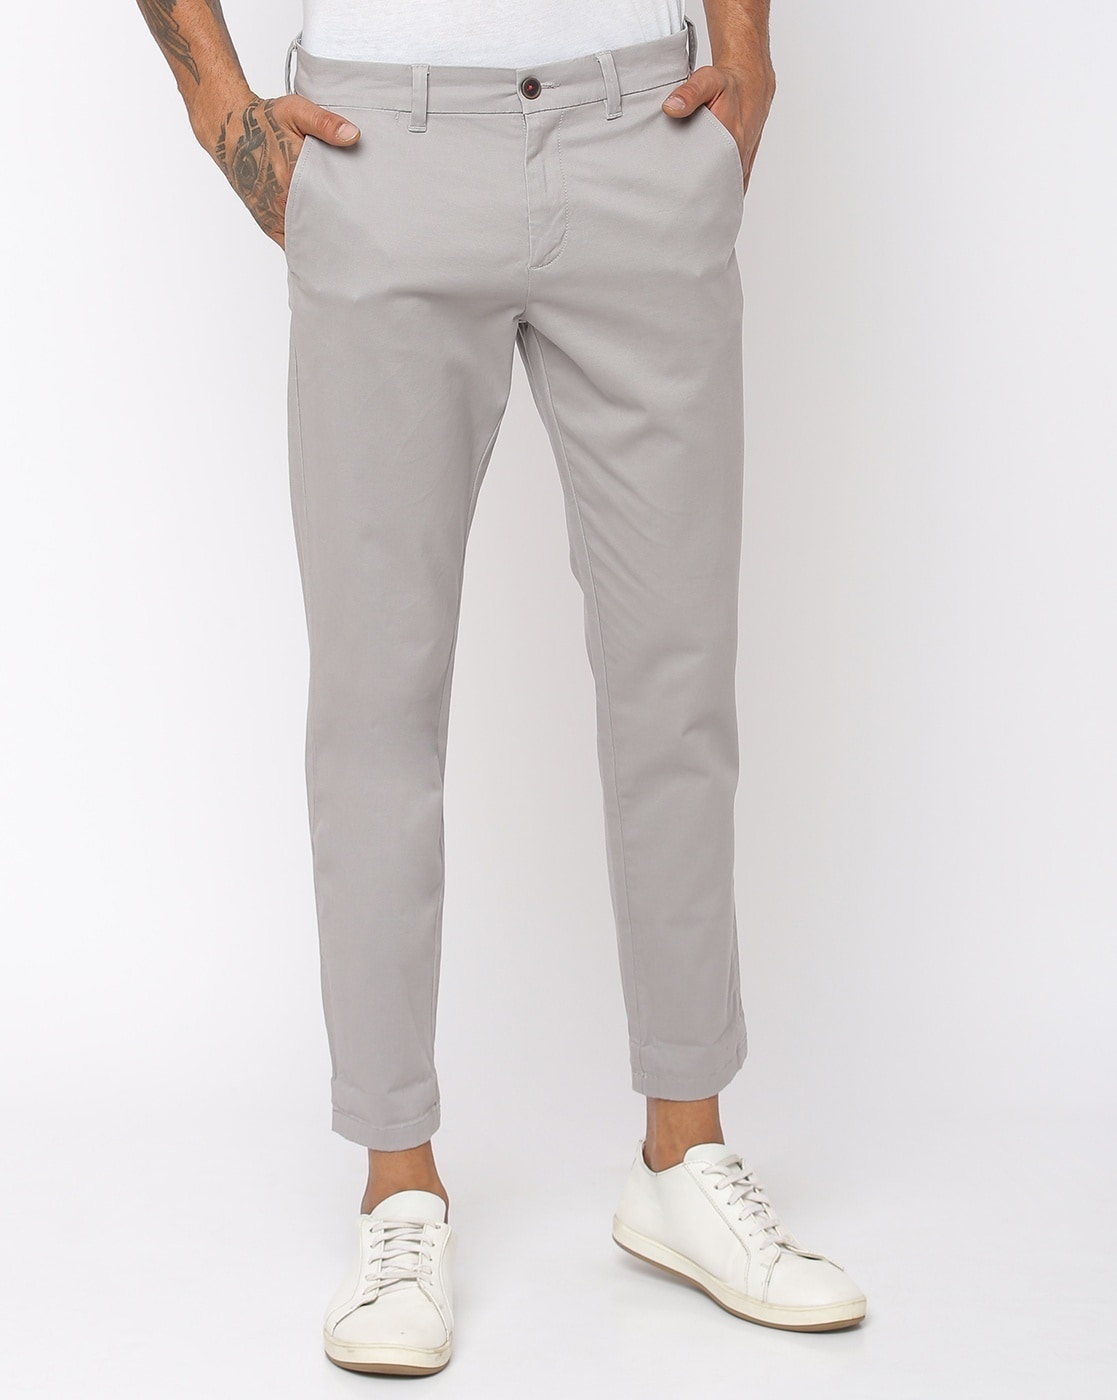 Luxtreme Slim-Fit Pull-On Mid-Rise Cropped Pant | lululemon Hong Kong SAR